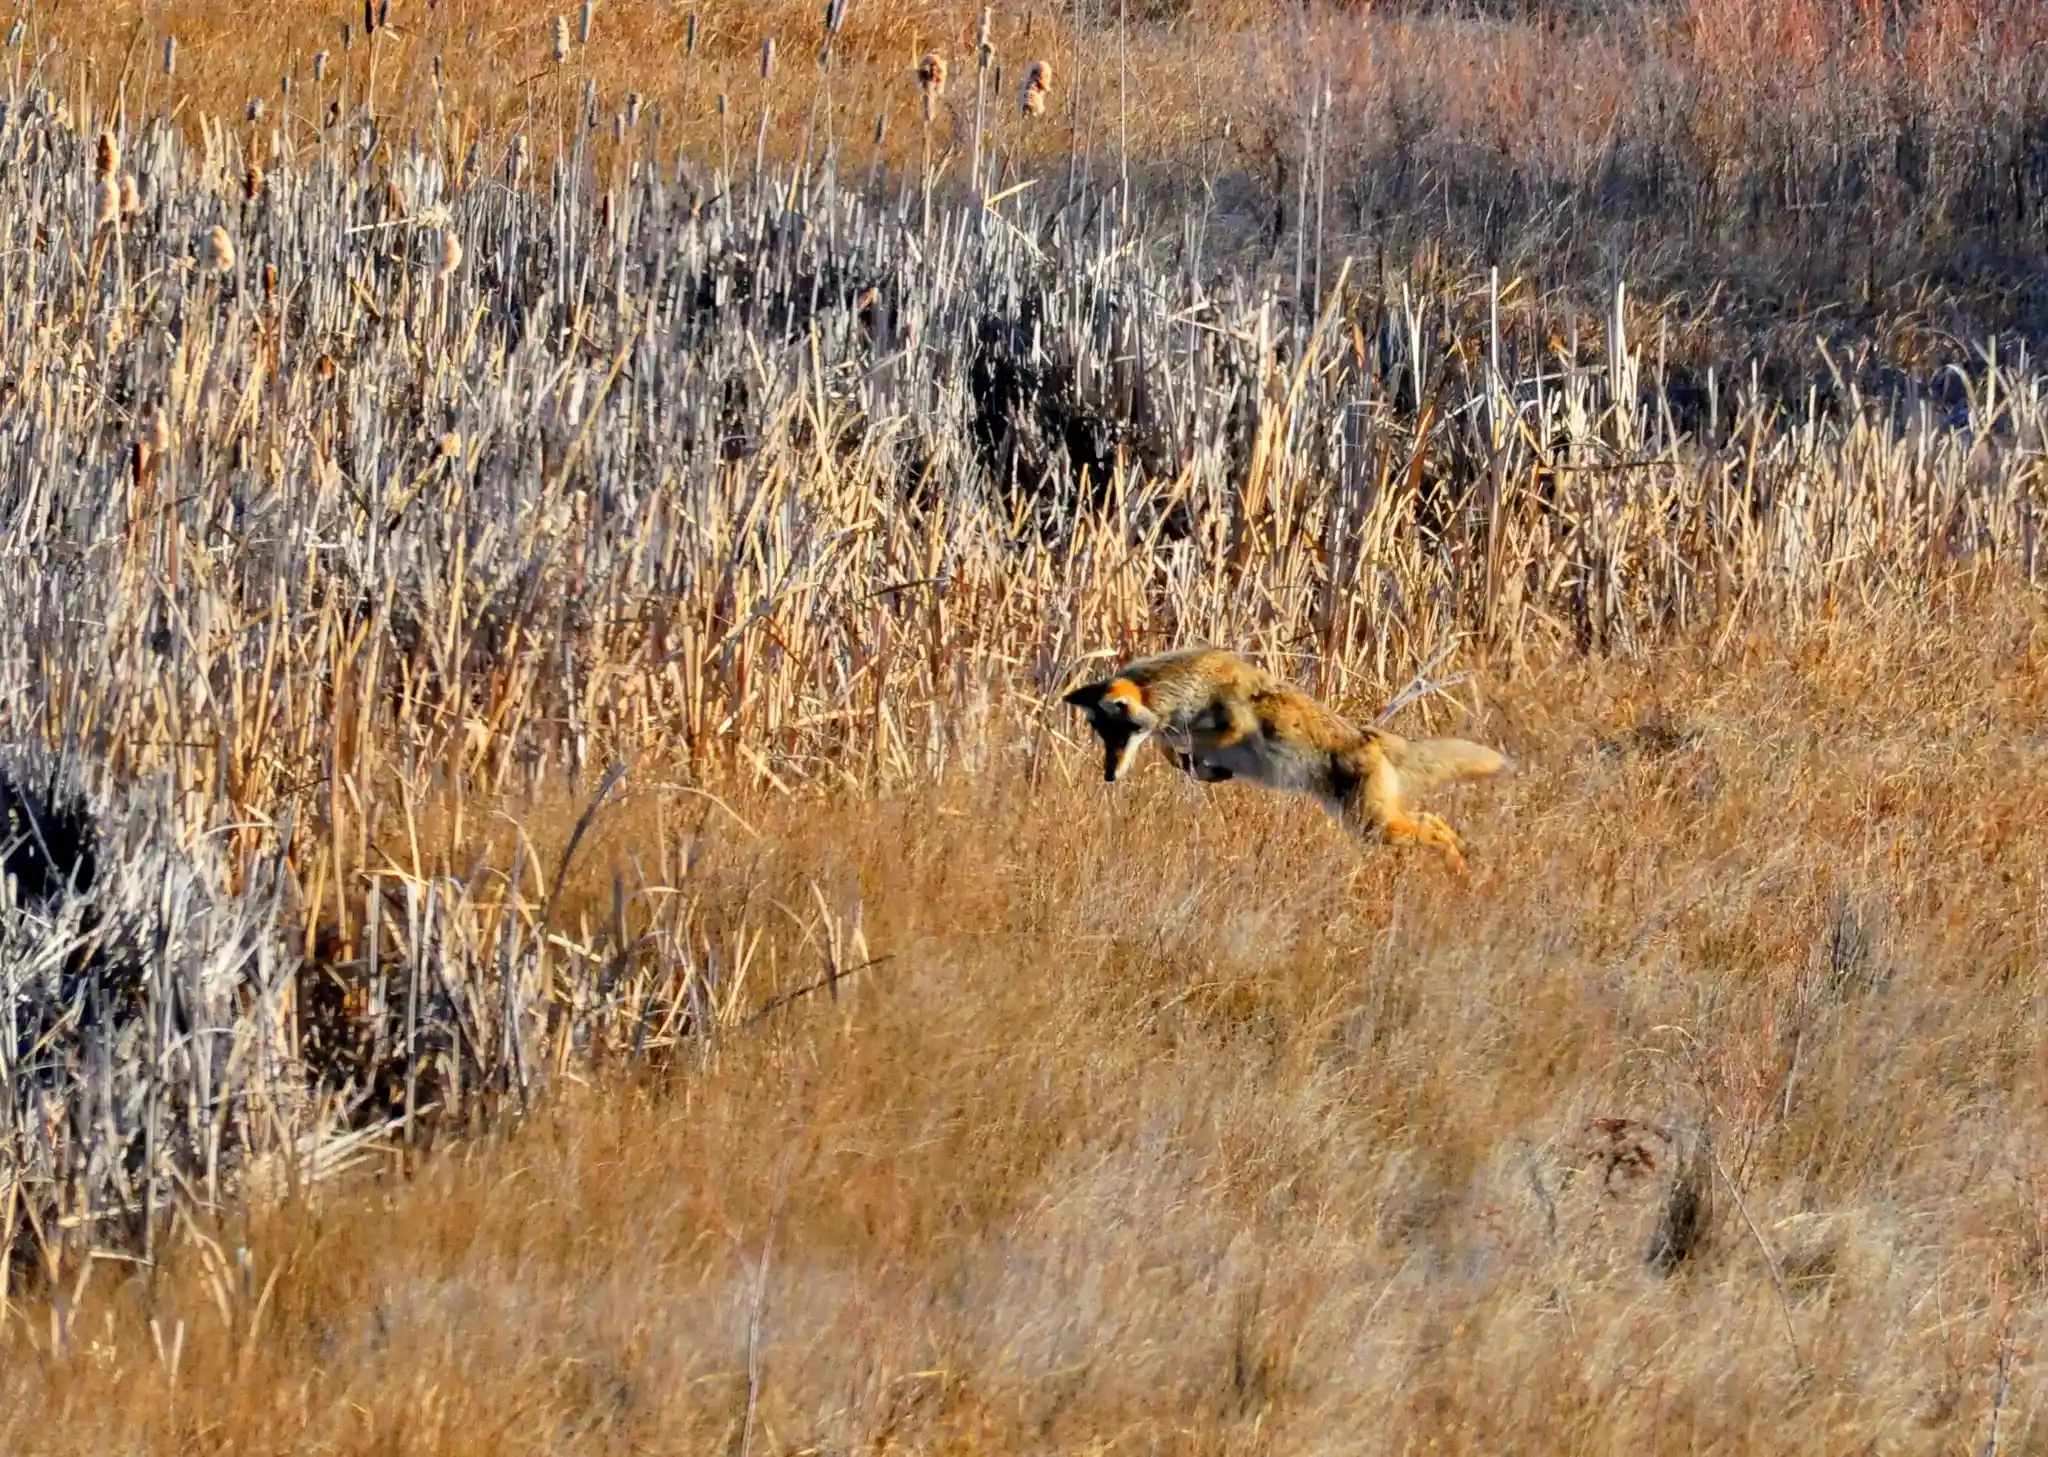 coyote hunting meadow voles by leaping in air